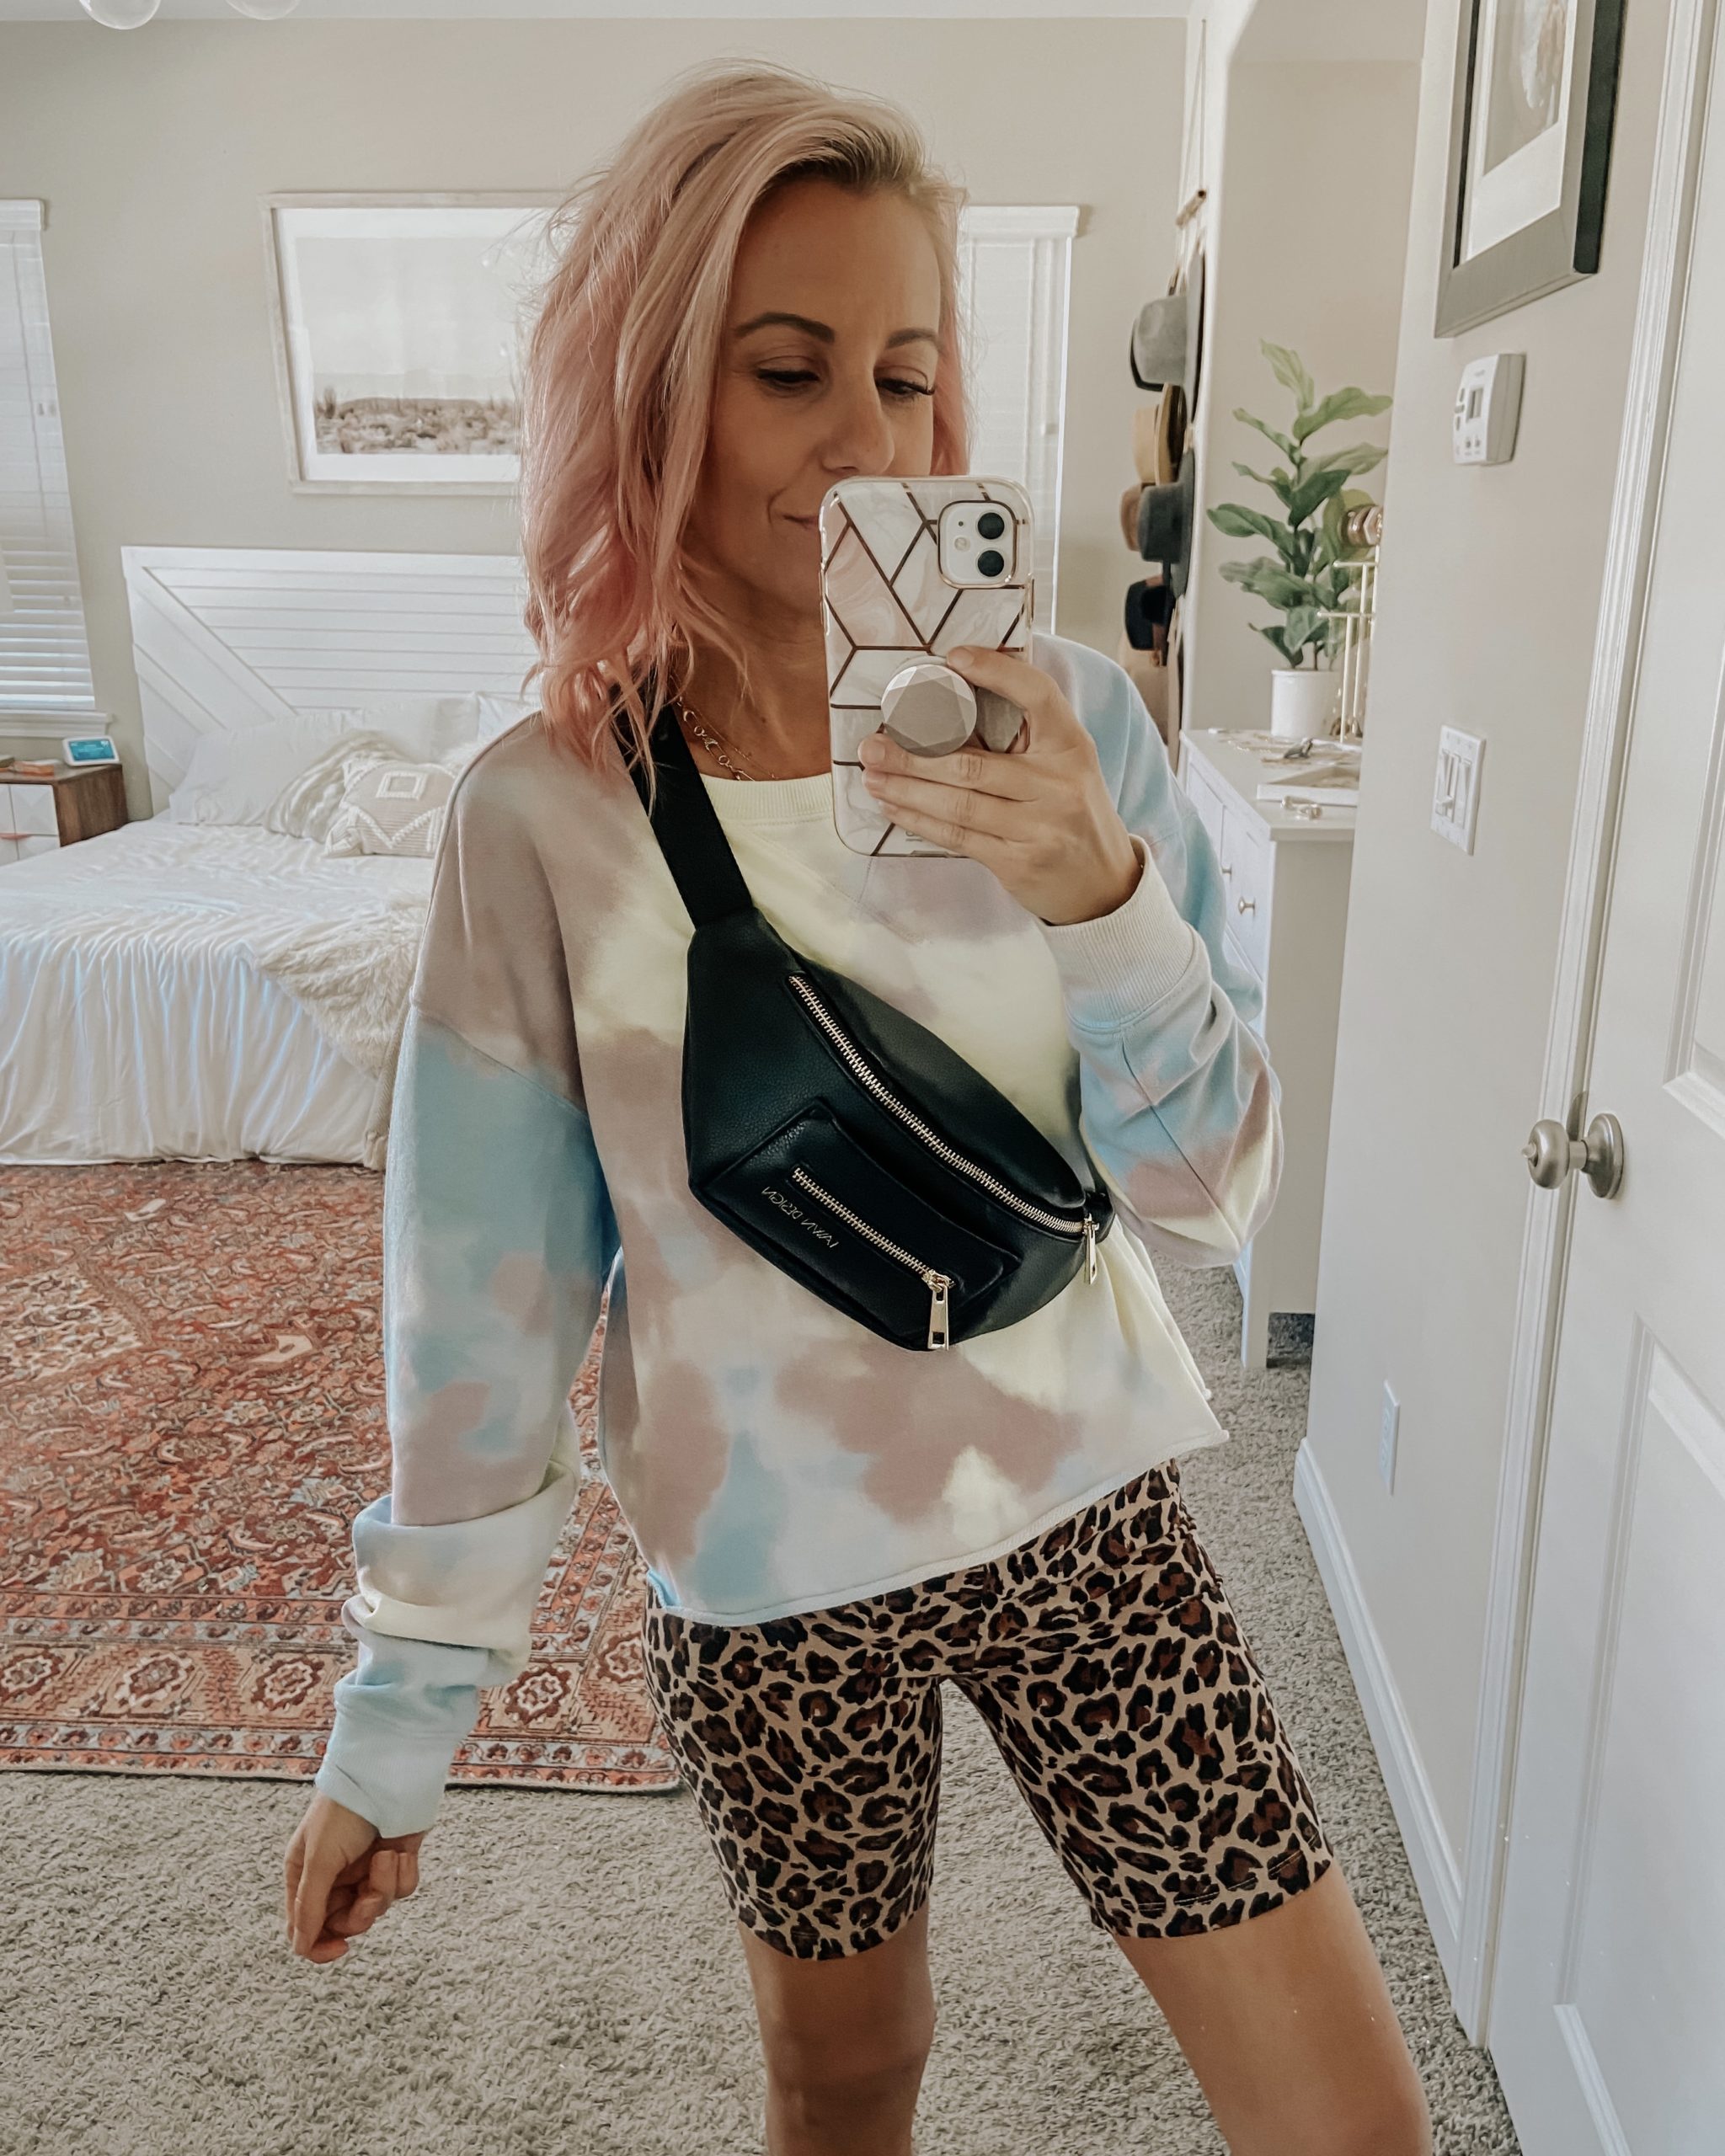 TIE DYE + LEOPARD- Jaclyn De Leon Style + sharing several ways to pattern mix with leopard and tie dye from comfy casual to all dressed up. Style tips included